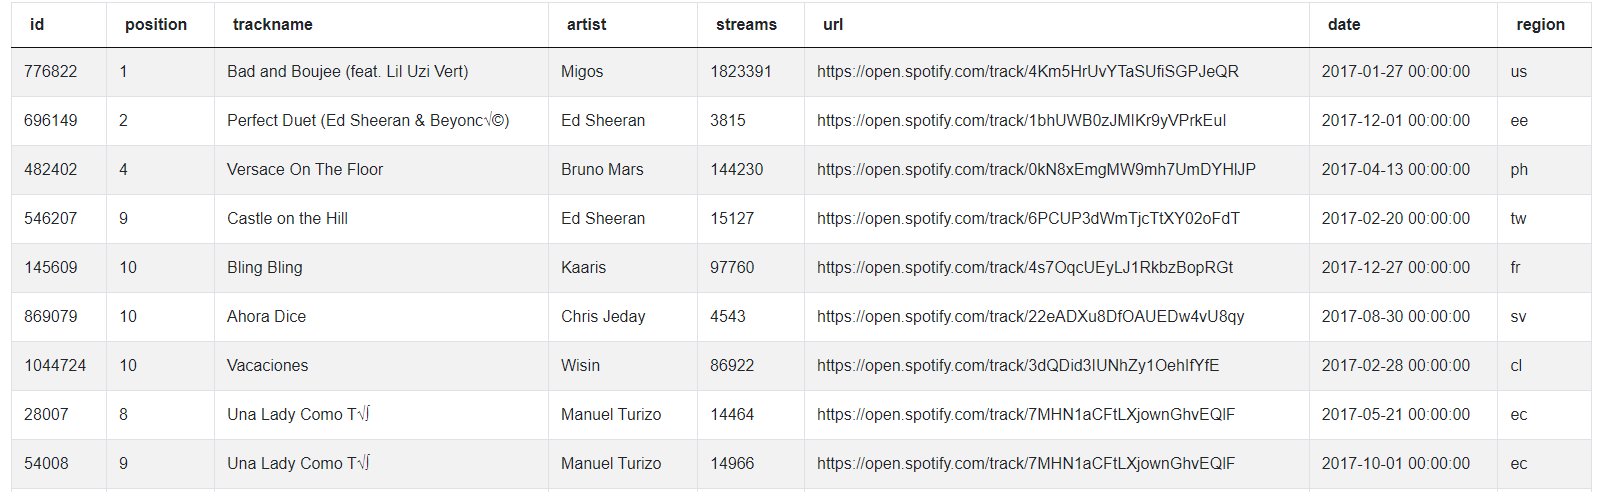 Output of Python Pandas Interview Questions for Top 10 Ranked Songs